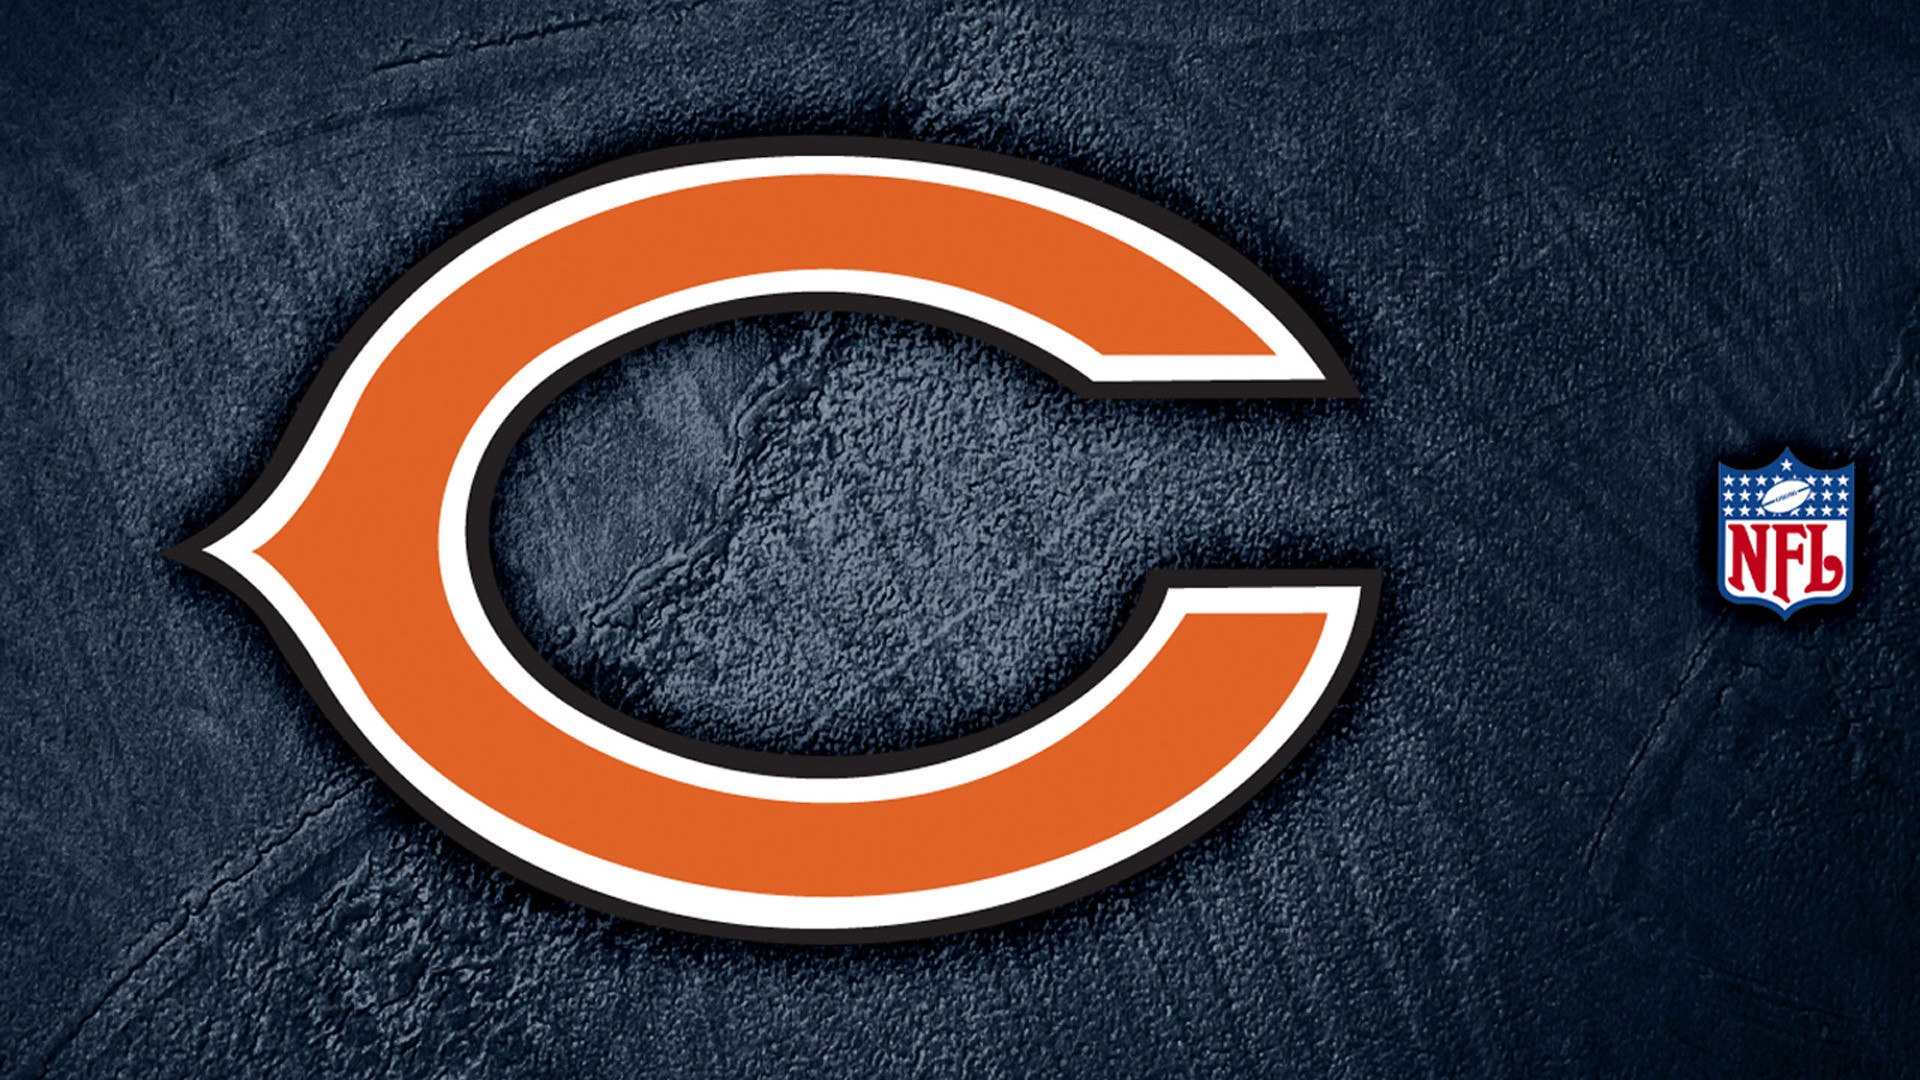 HD Bears Wallpapers with high-resolution 1920x1080 pixel. You can use this wallpaper for your Mac or Windows Desktop Background, iPhone, Android or Tablet and another Smartphone device